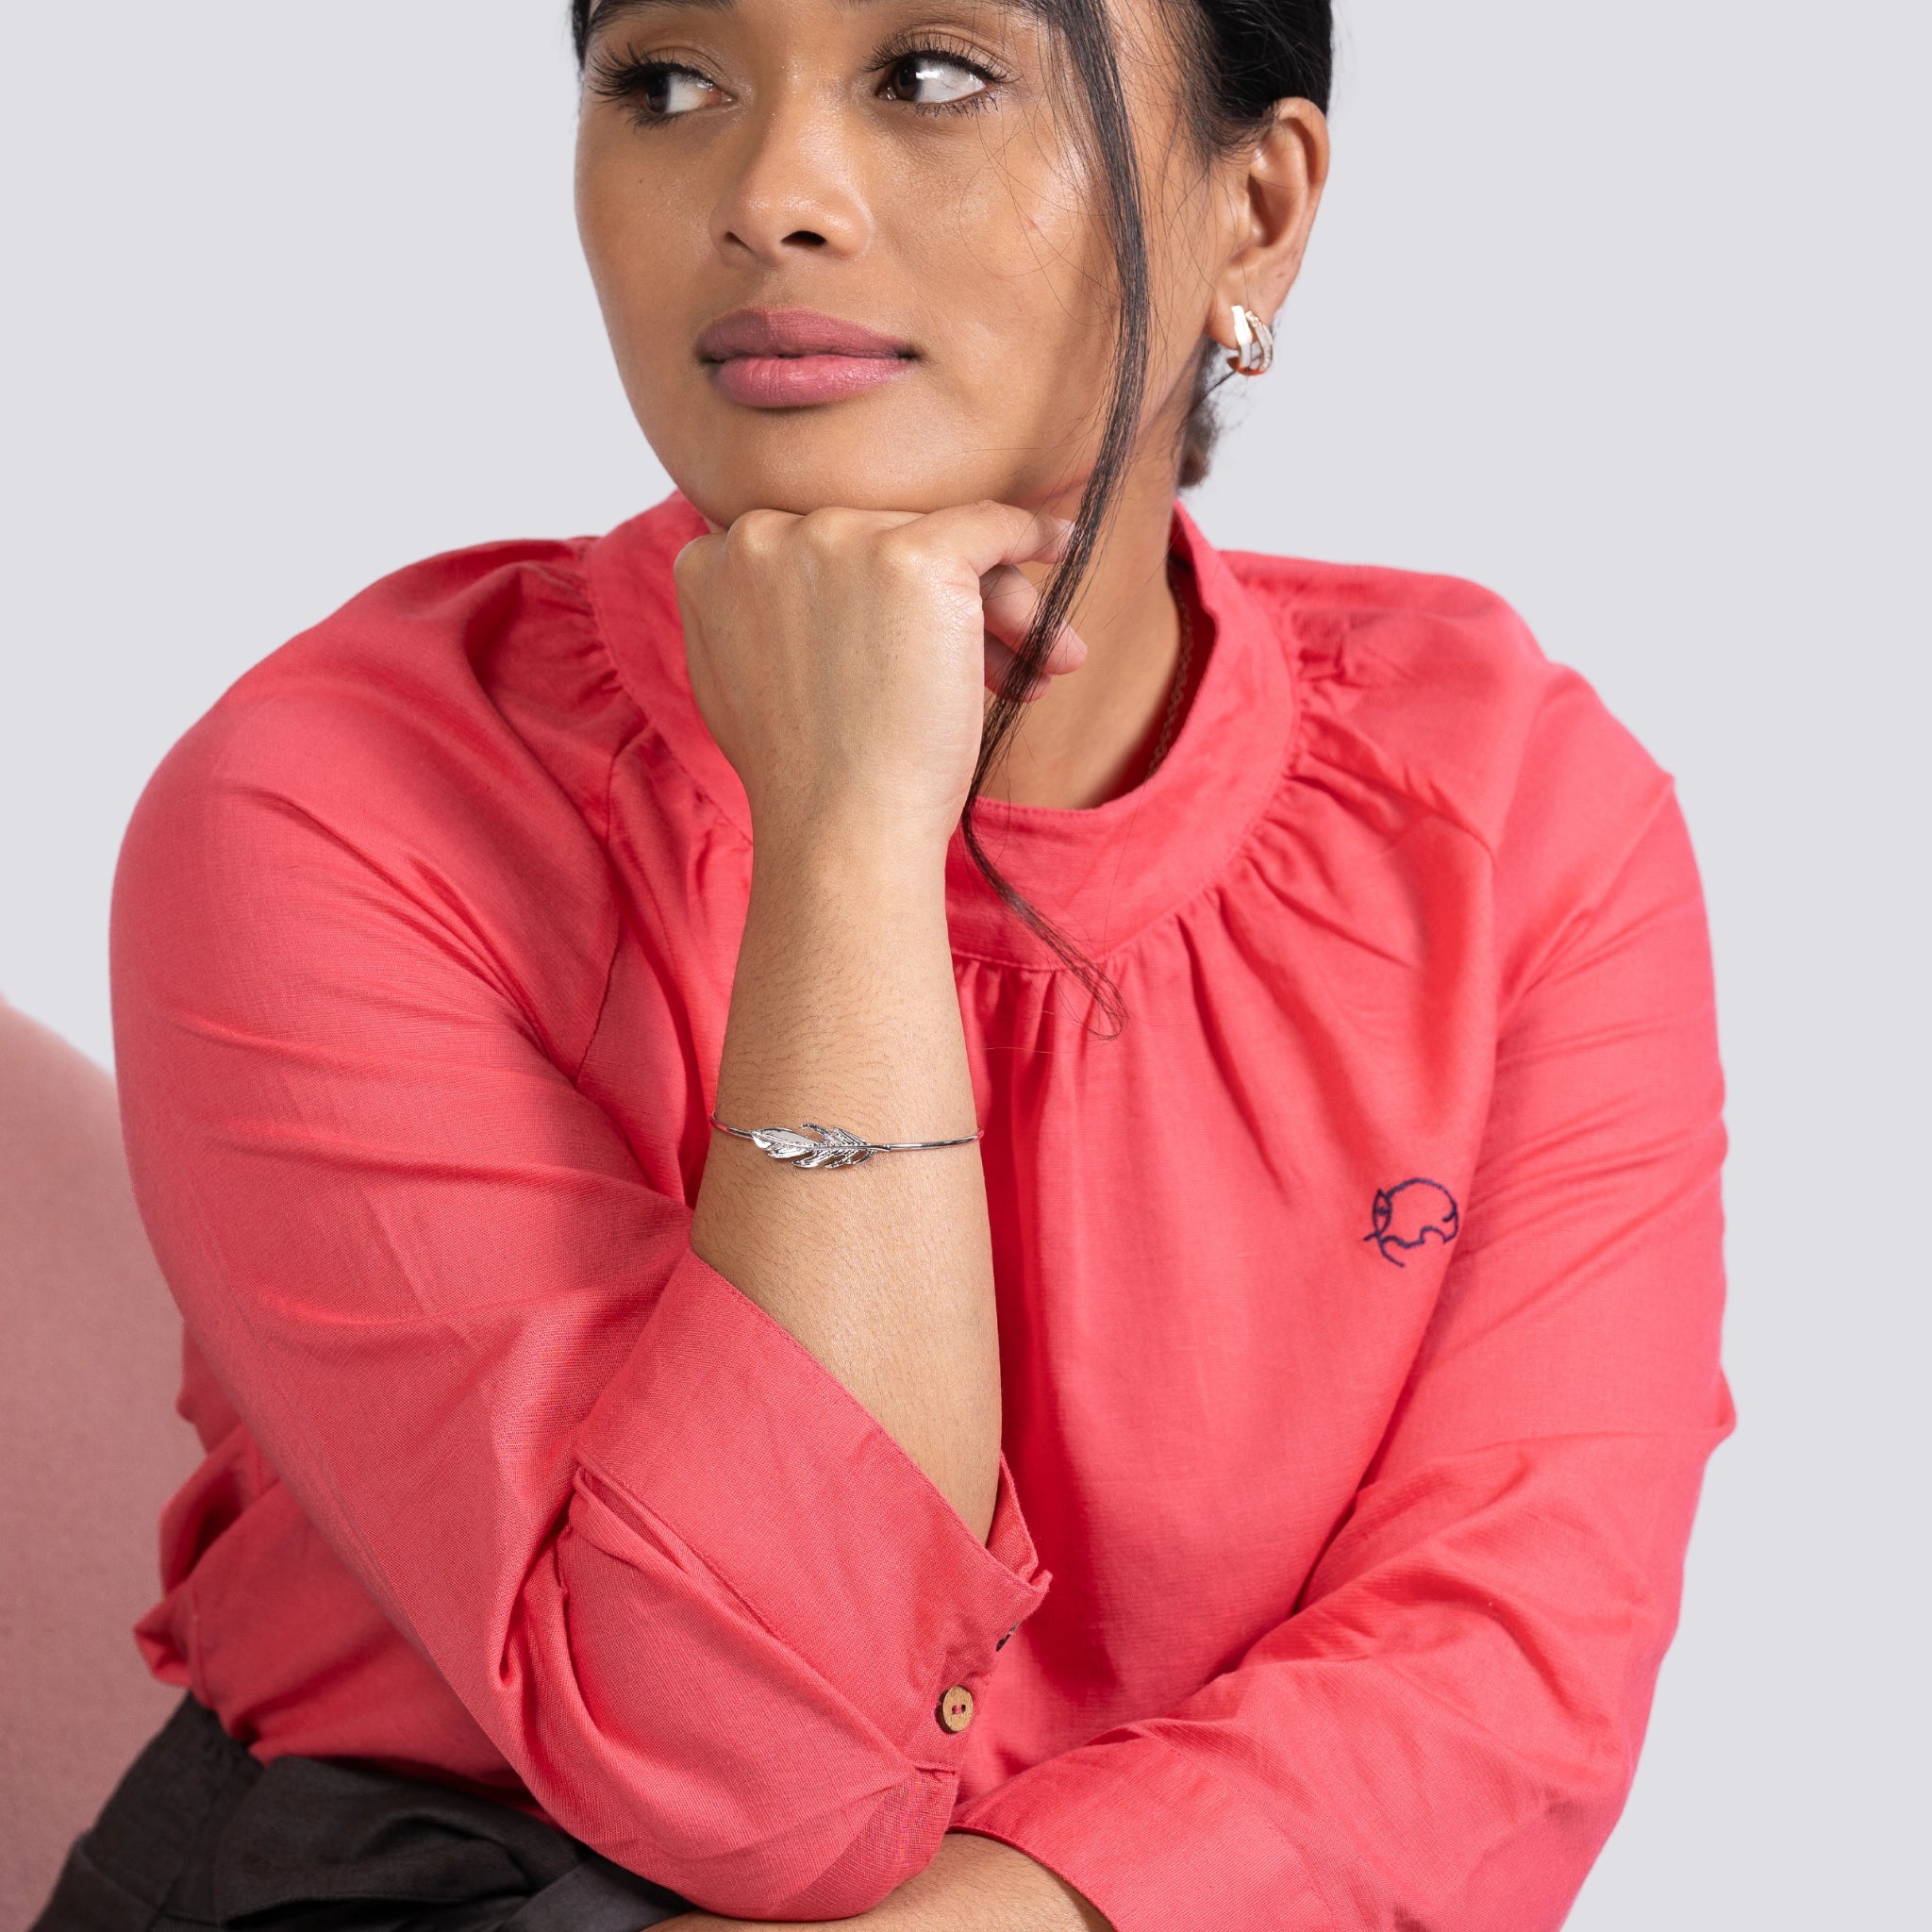 Woman in a Karee fuchsia elegance high neck top and a silver bracelet, resting chin on hand, looking thoughtful. Light gray background.